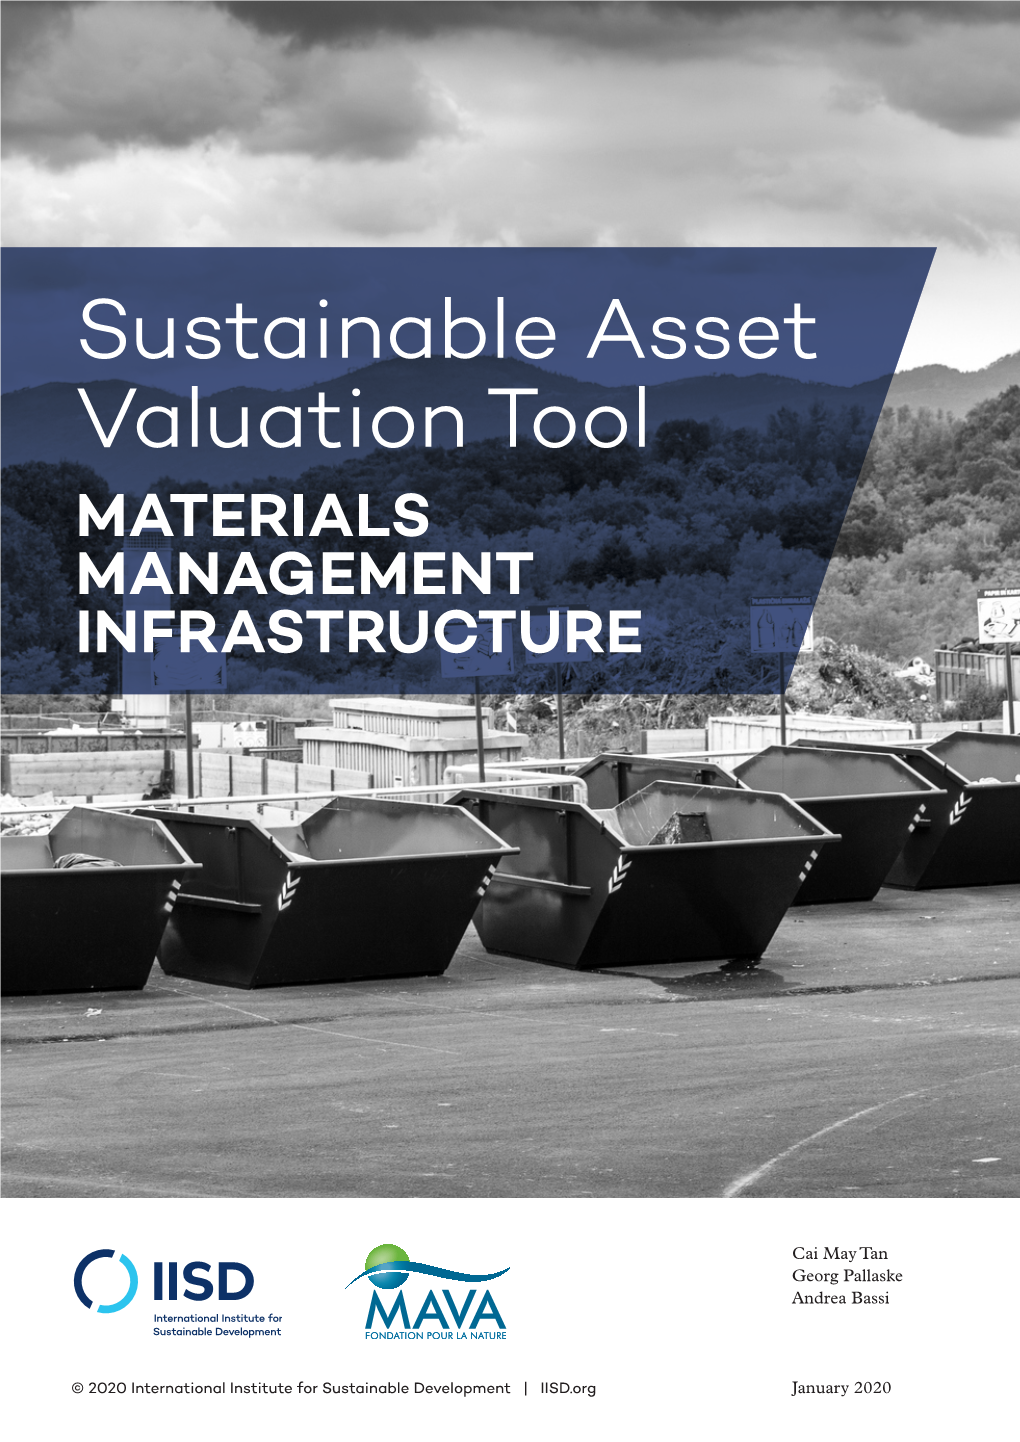 Sustainable Asset Valuation Tool: Materials Management Infrastructure